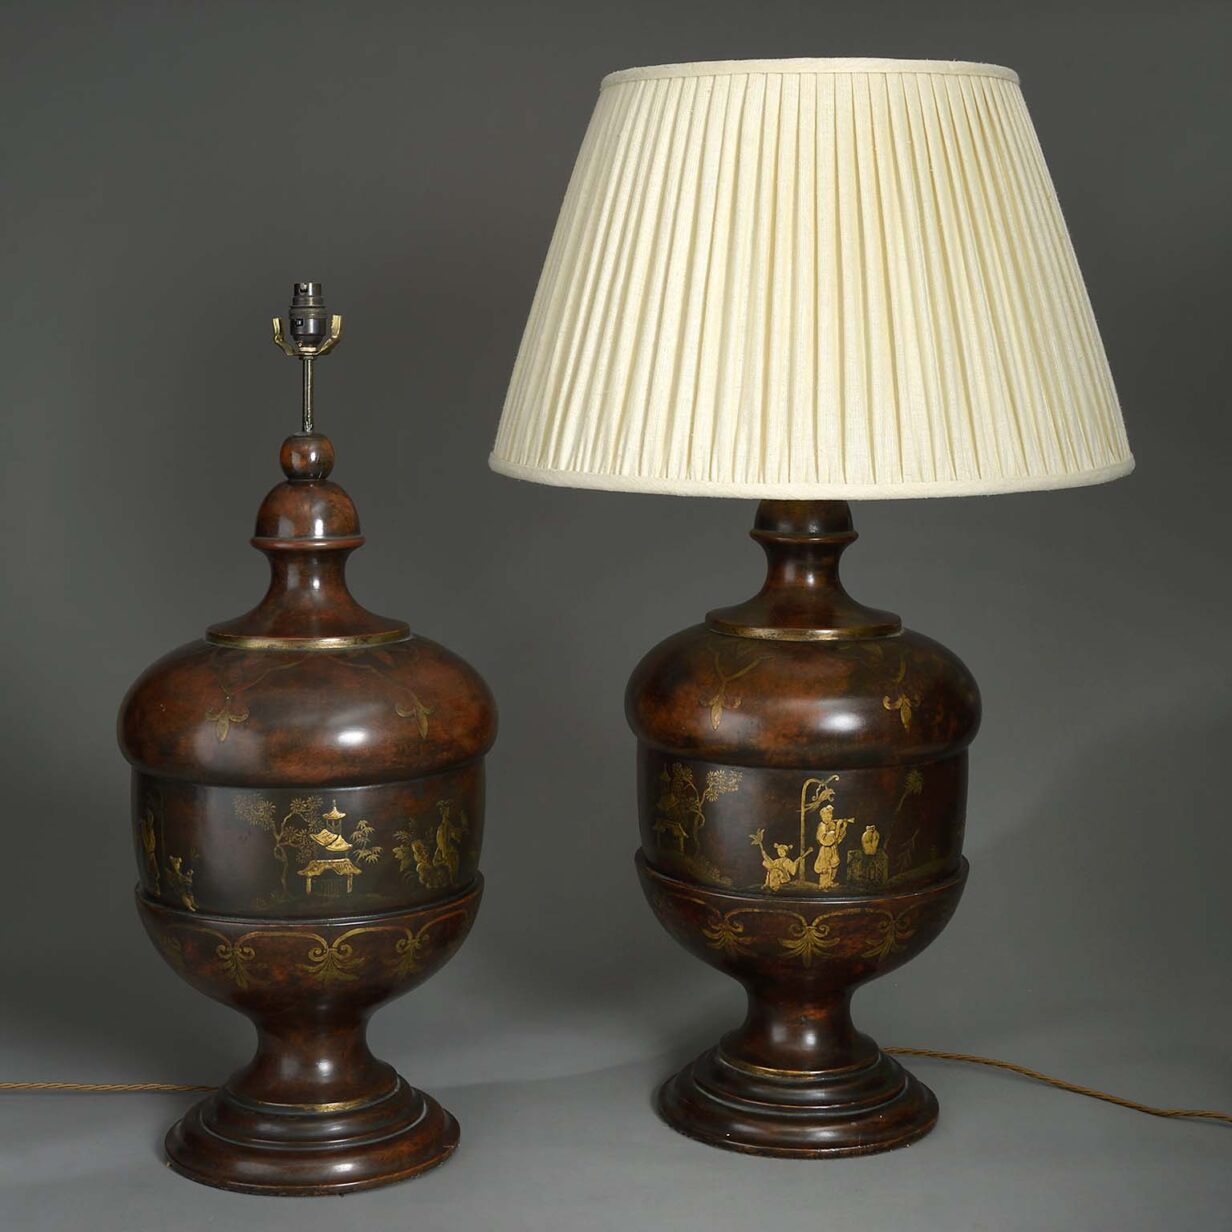 Pair of chinoiserie lamps